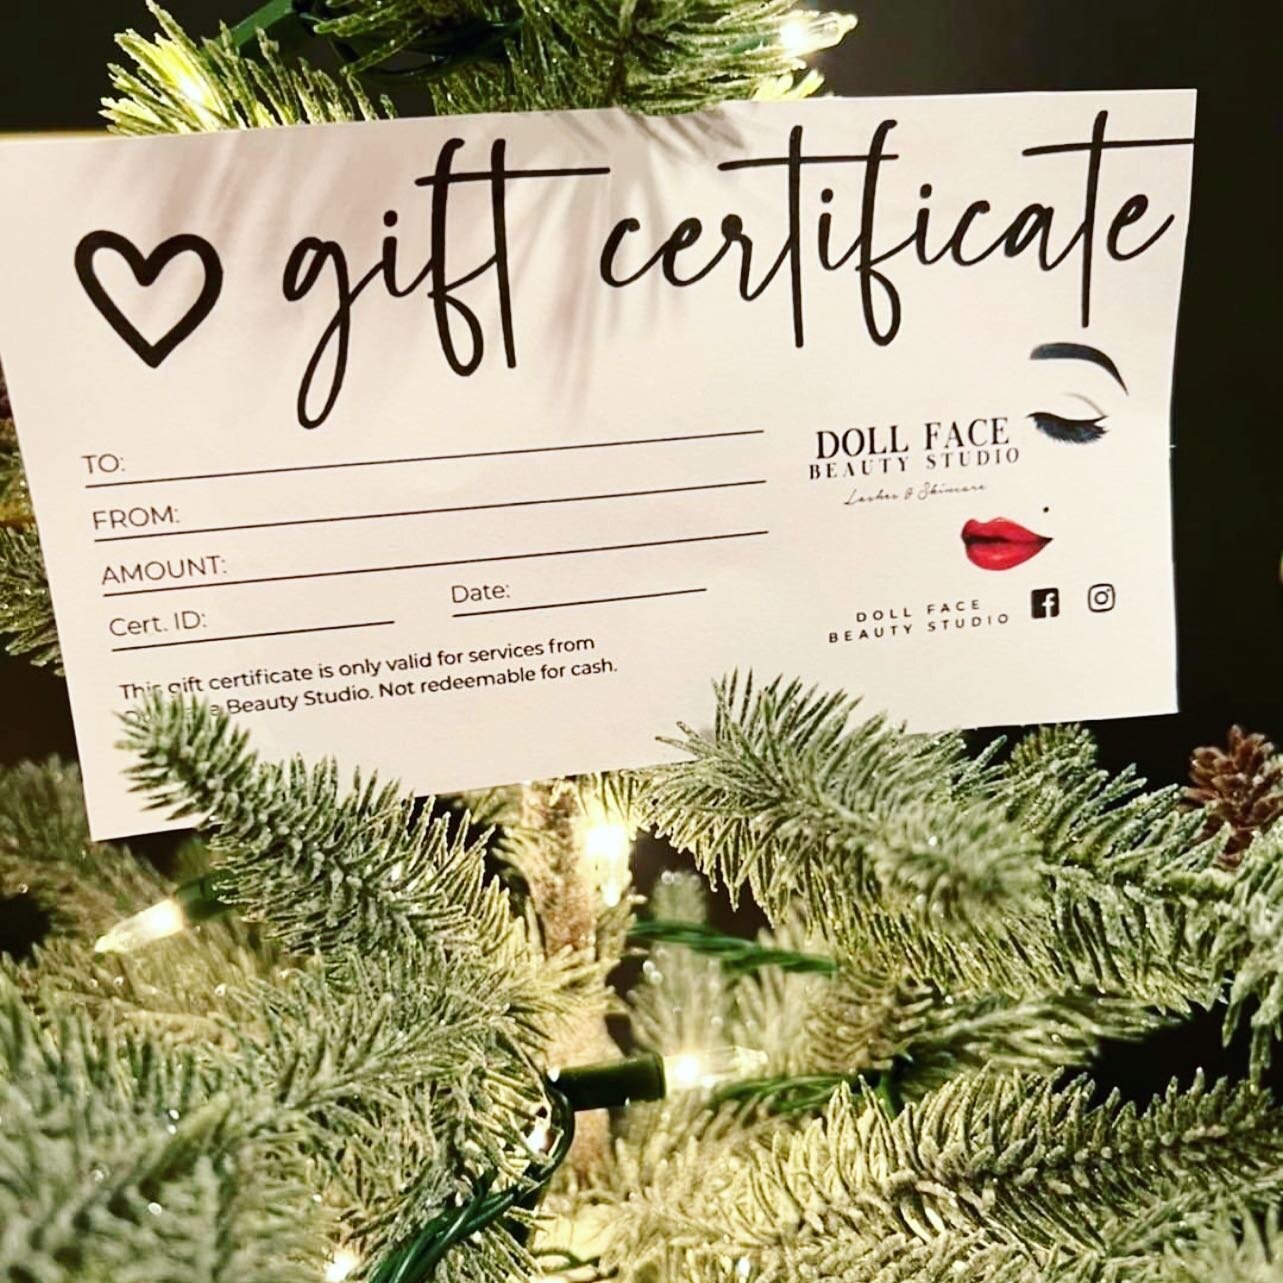 ✨Christmas is ONE week away! There is still time to purchase gift cards from from all your favorite suites!✨

#citysuitessalonandspas #salonsuites #shopsmall #giftcards